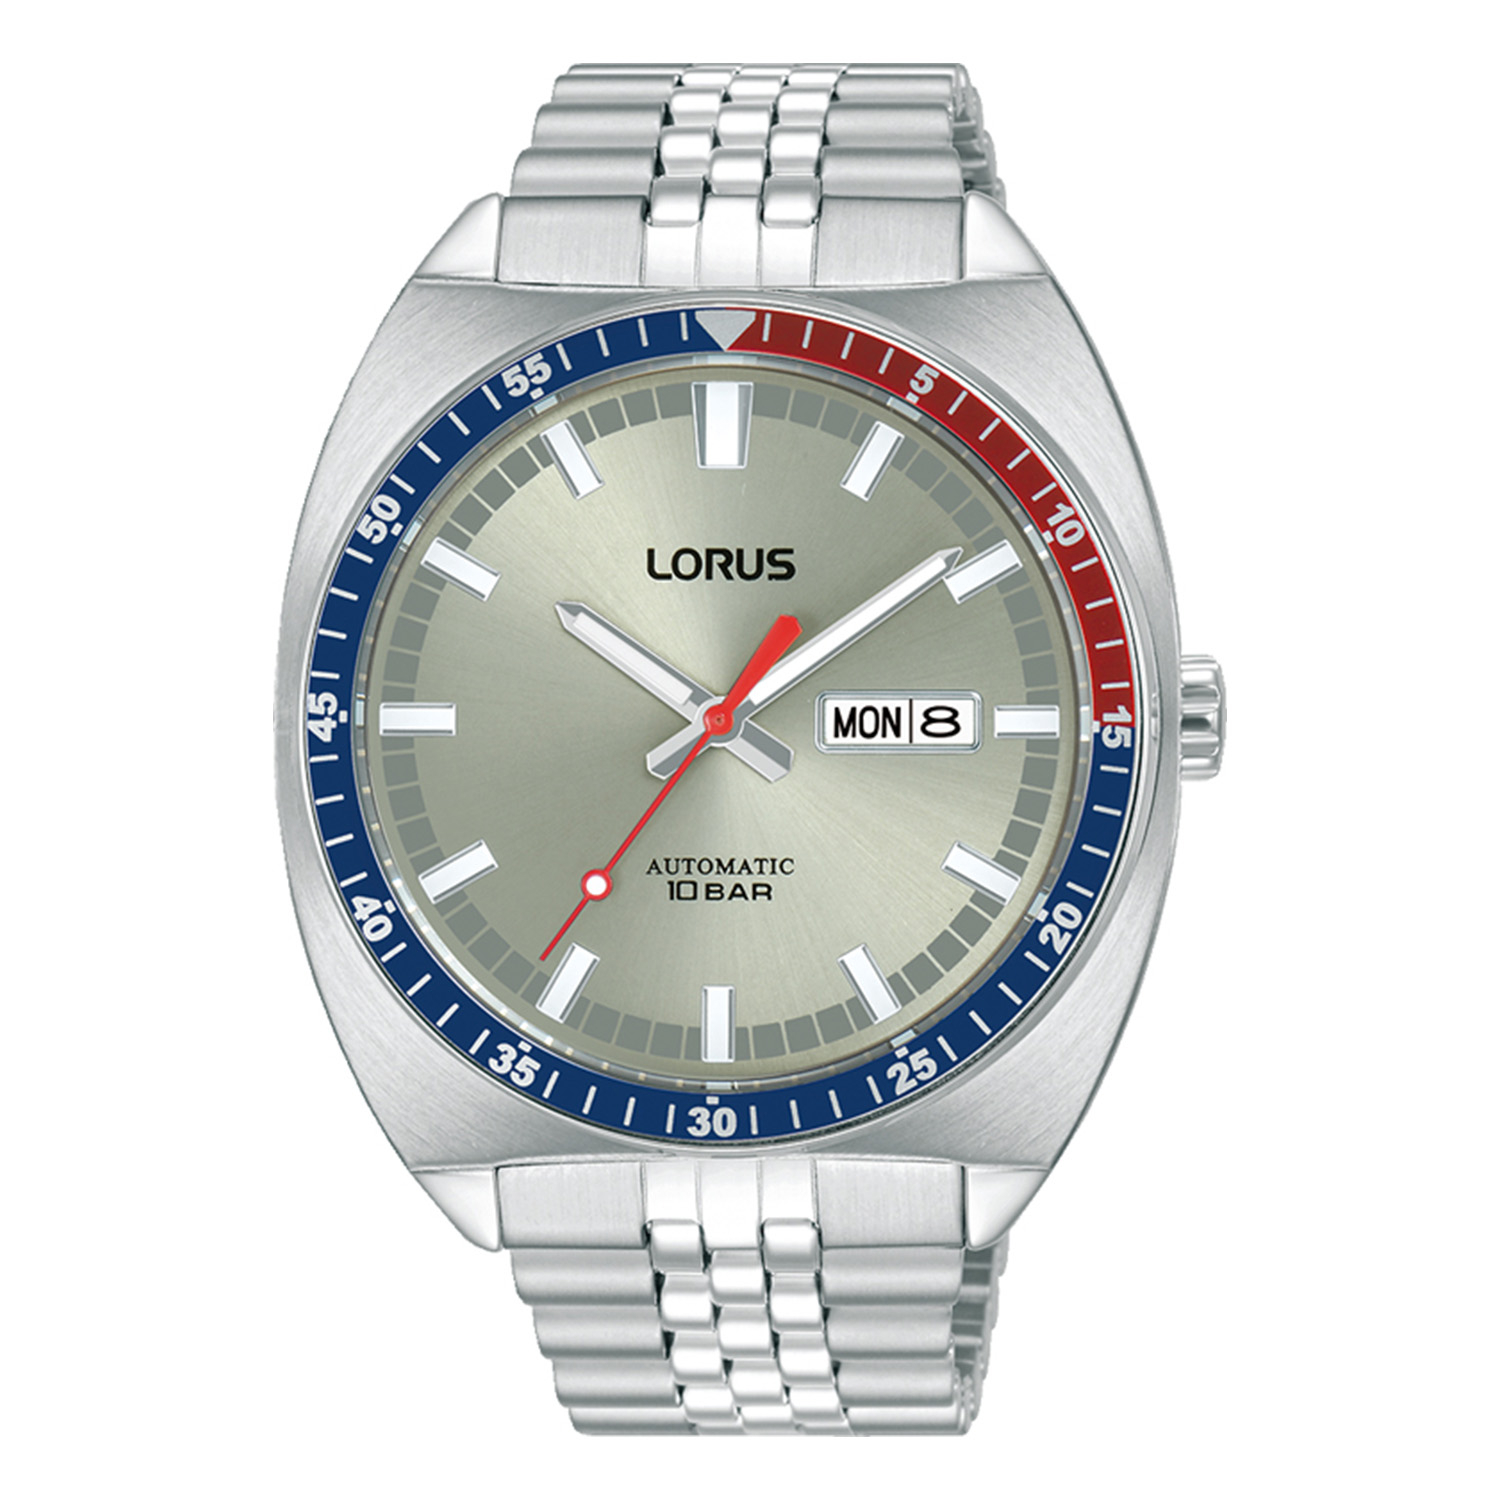 Mens LORUS stainless steel watch with grey dial and silver bracelet.